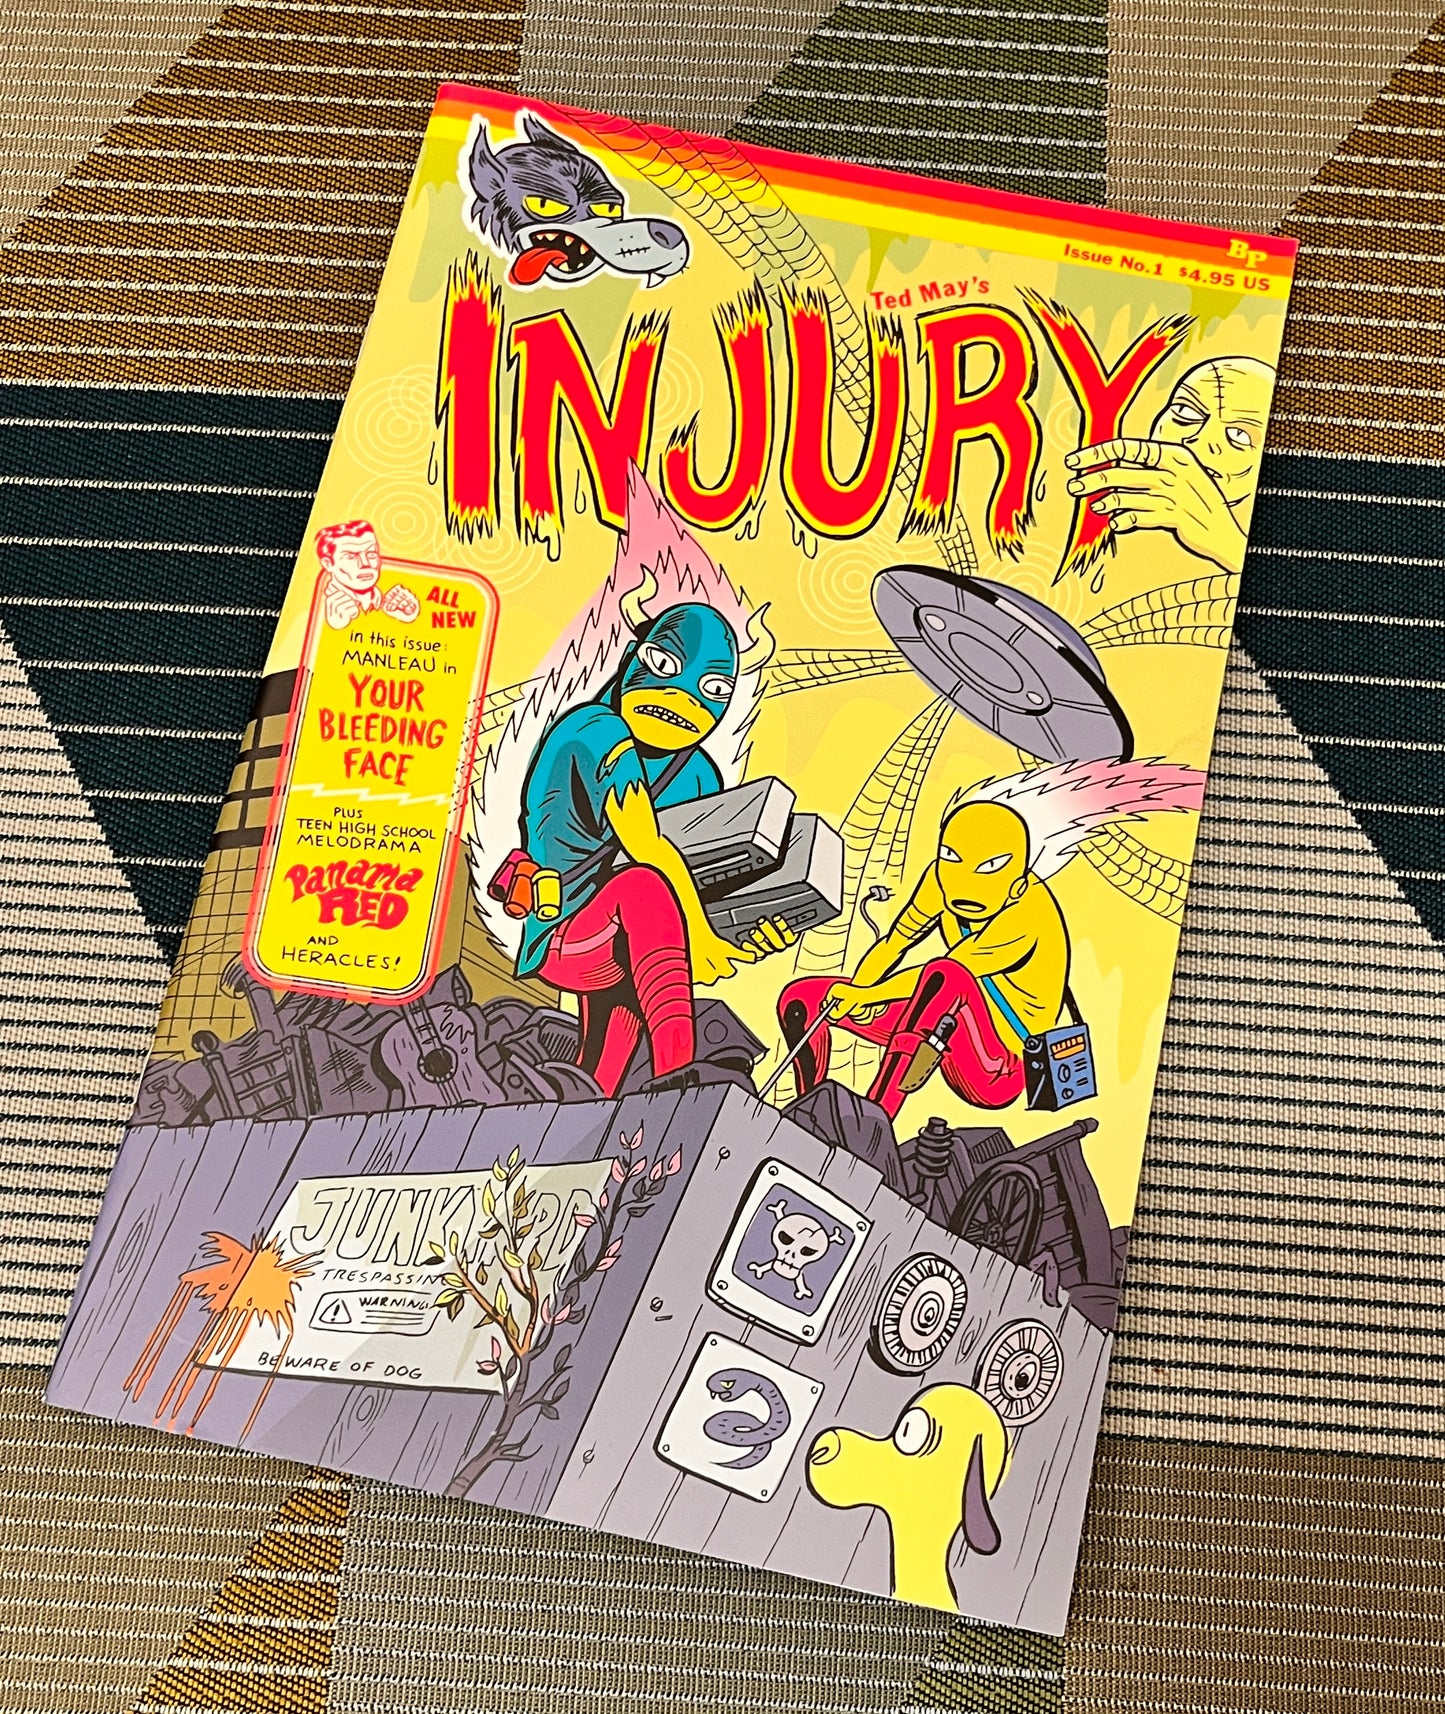 Ted May's Injury Issue No. 1